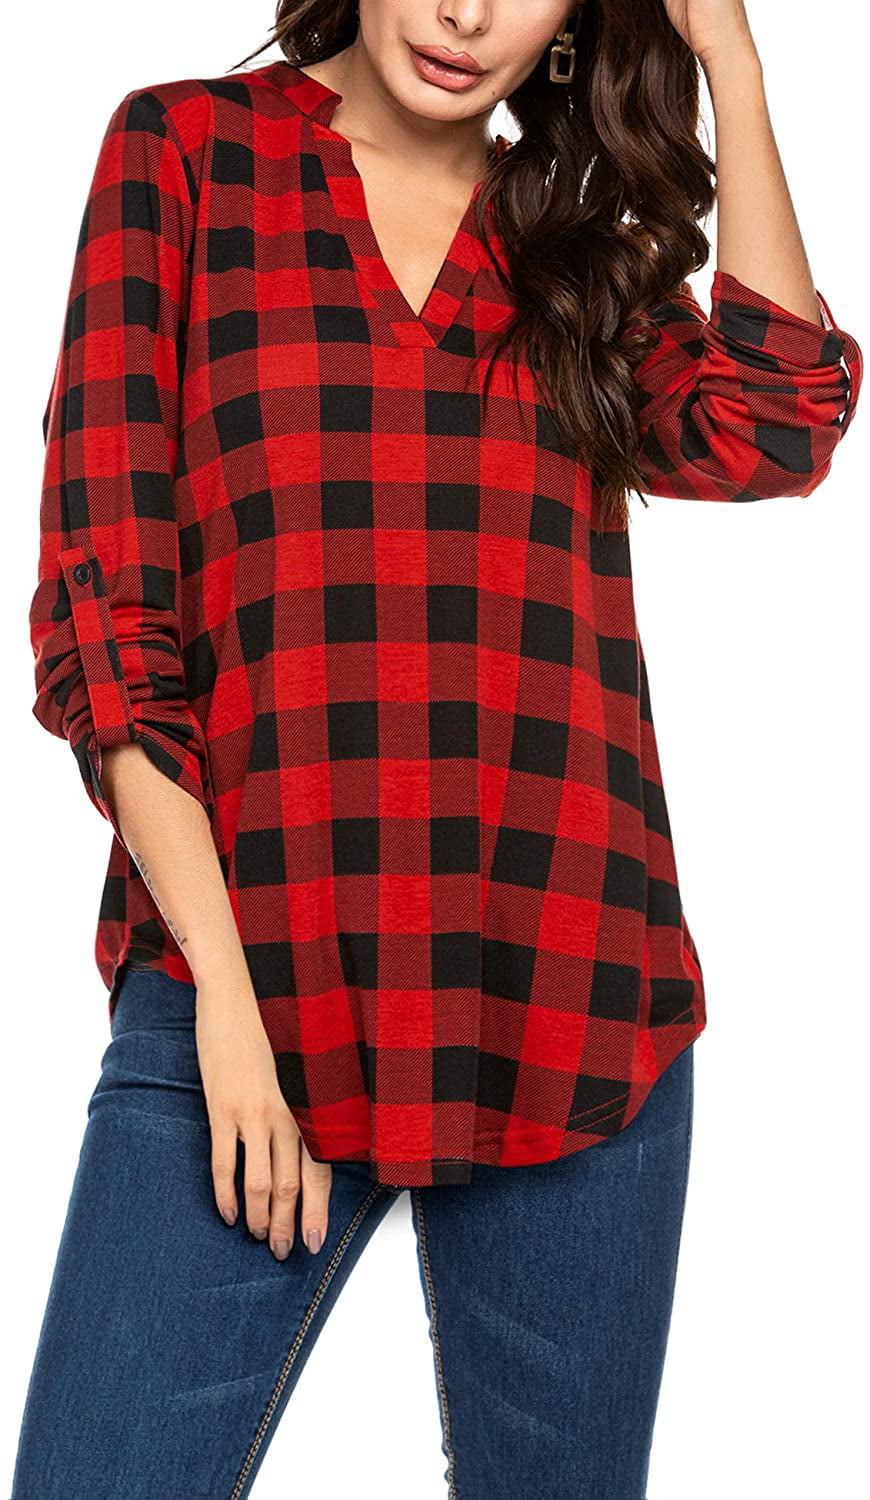 Hotouch Women's Plaid Shirts Casual Notch V Neck Blouse Cuffed Long Sleeve Pullover Soft Tunic Tops